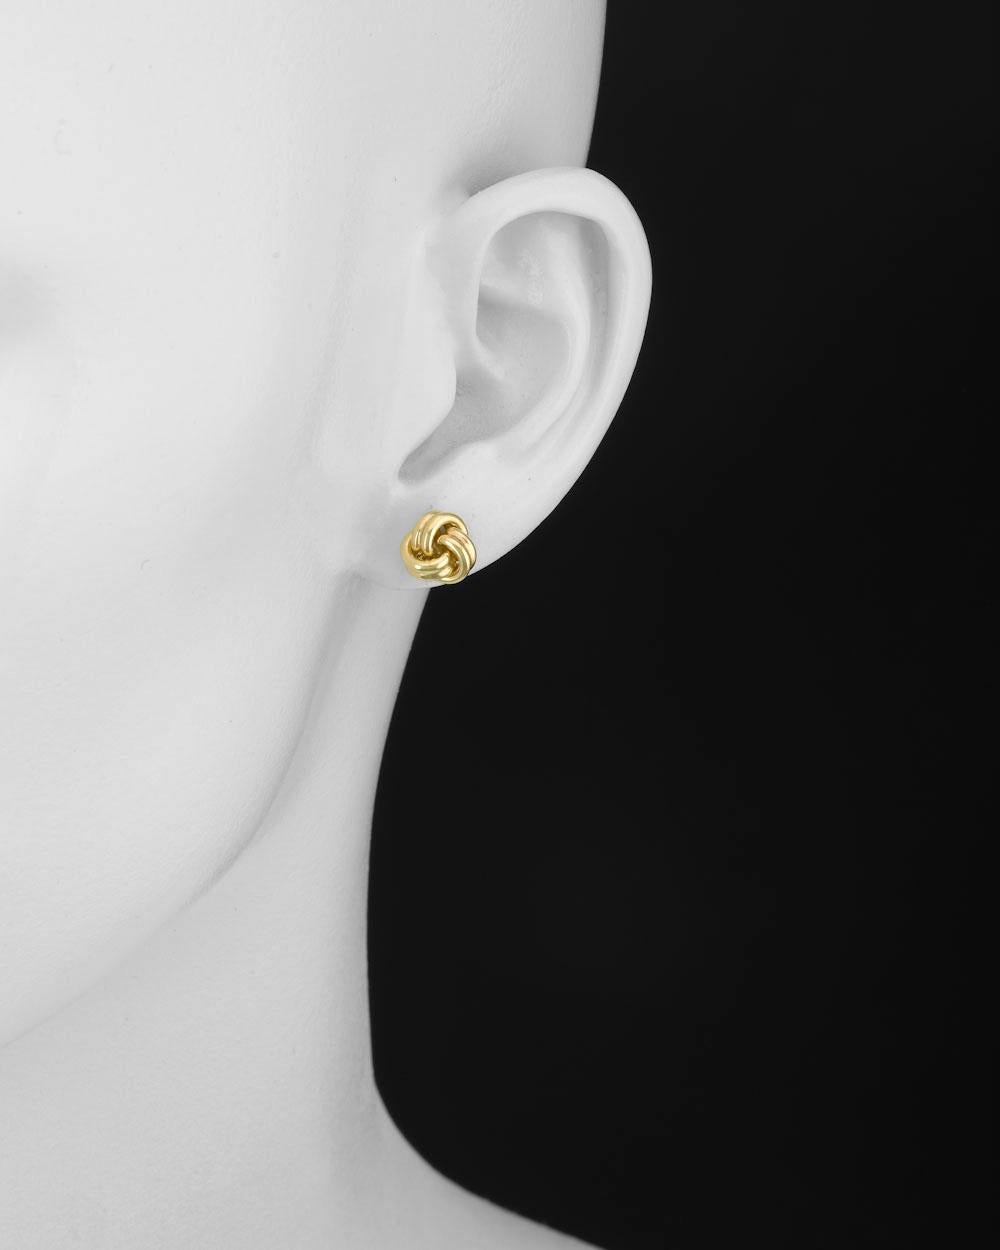 Three-loop knot earstuds in polished 18k yellow gold. Posts with friction backs for pierced ears. 0.35